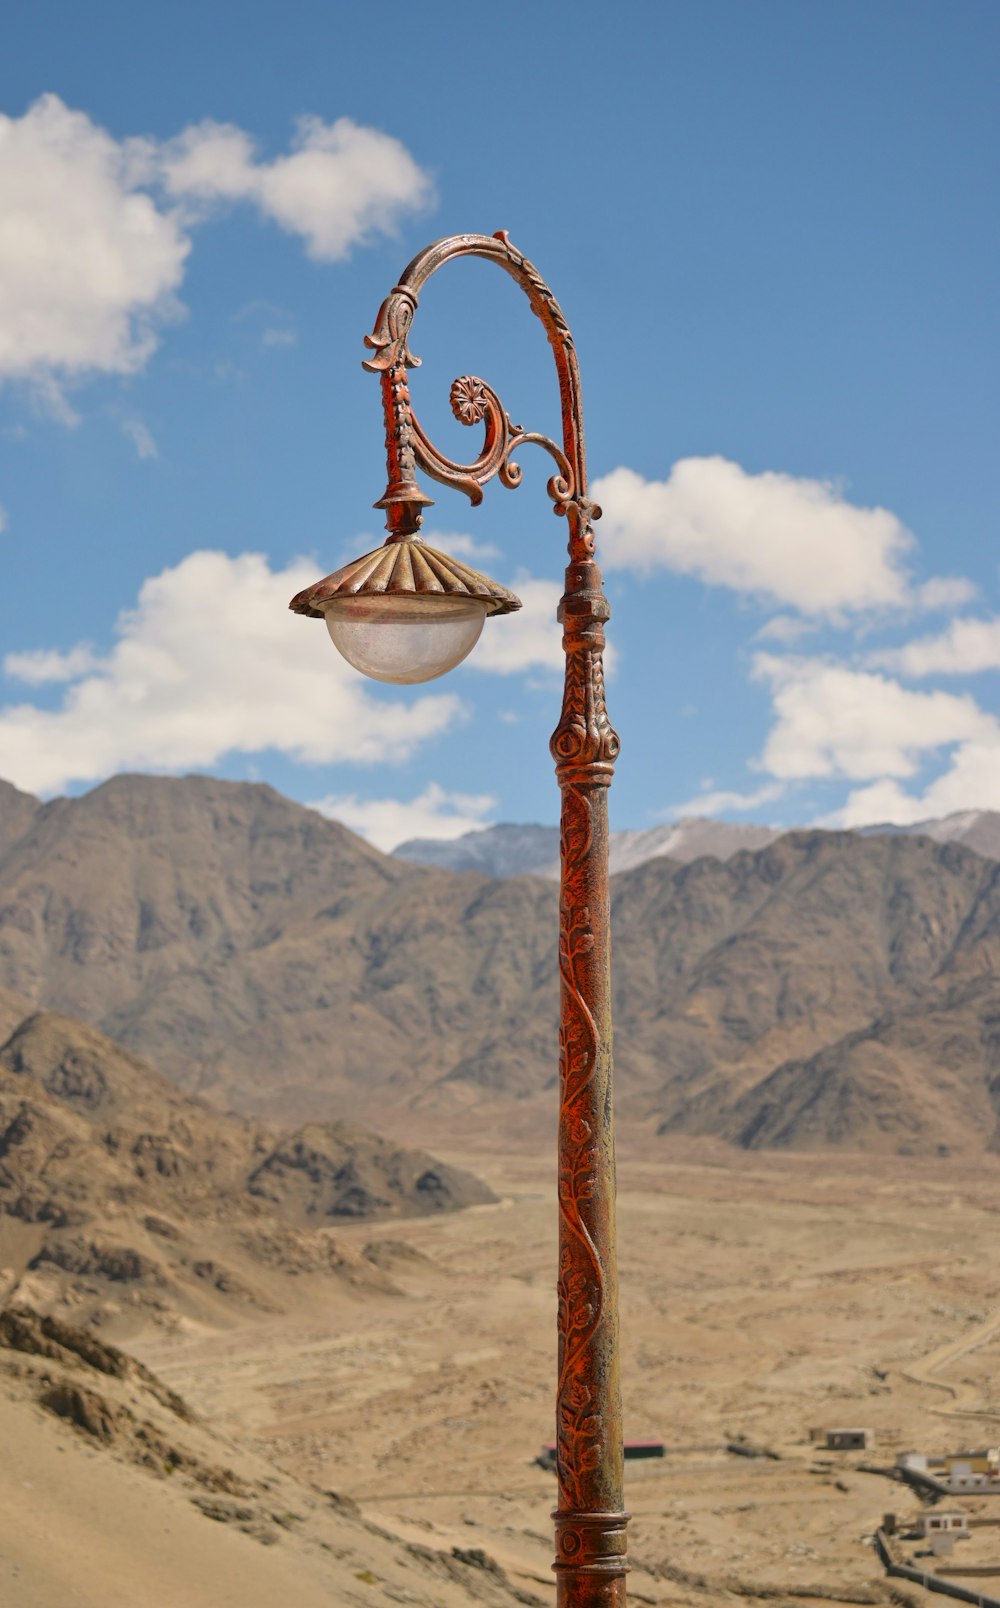 a lamp post in the middle of a desert